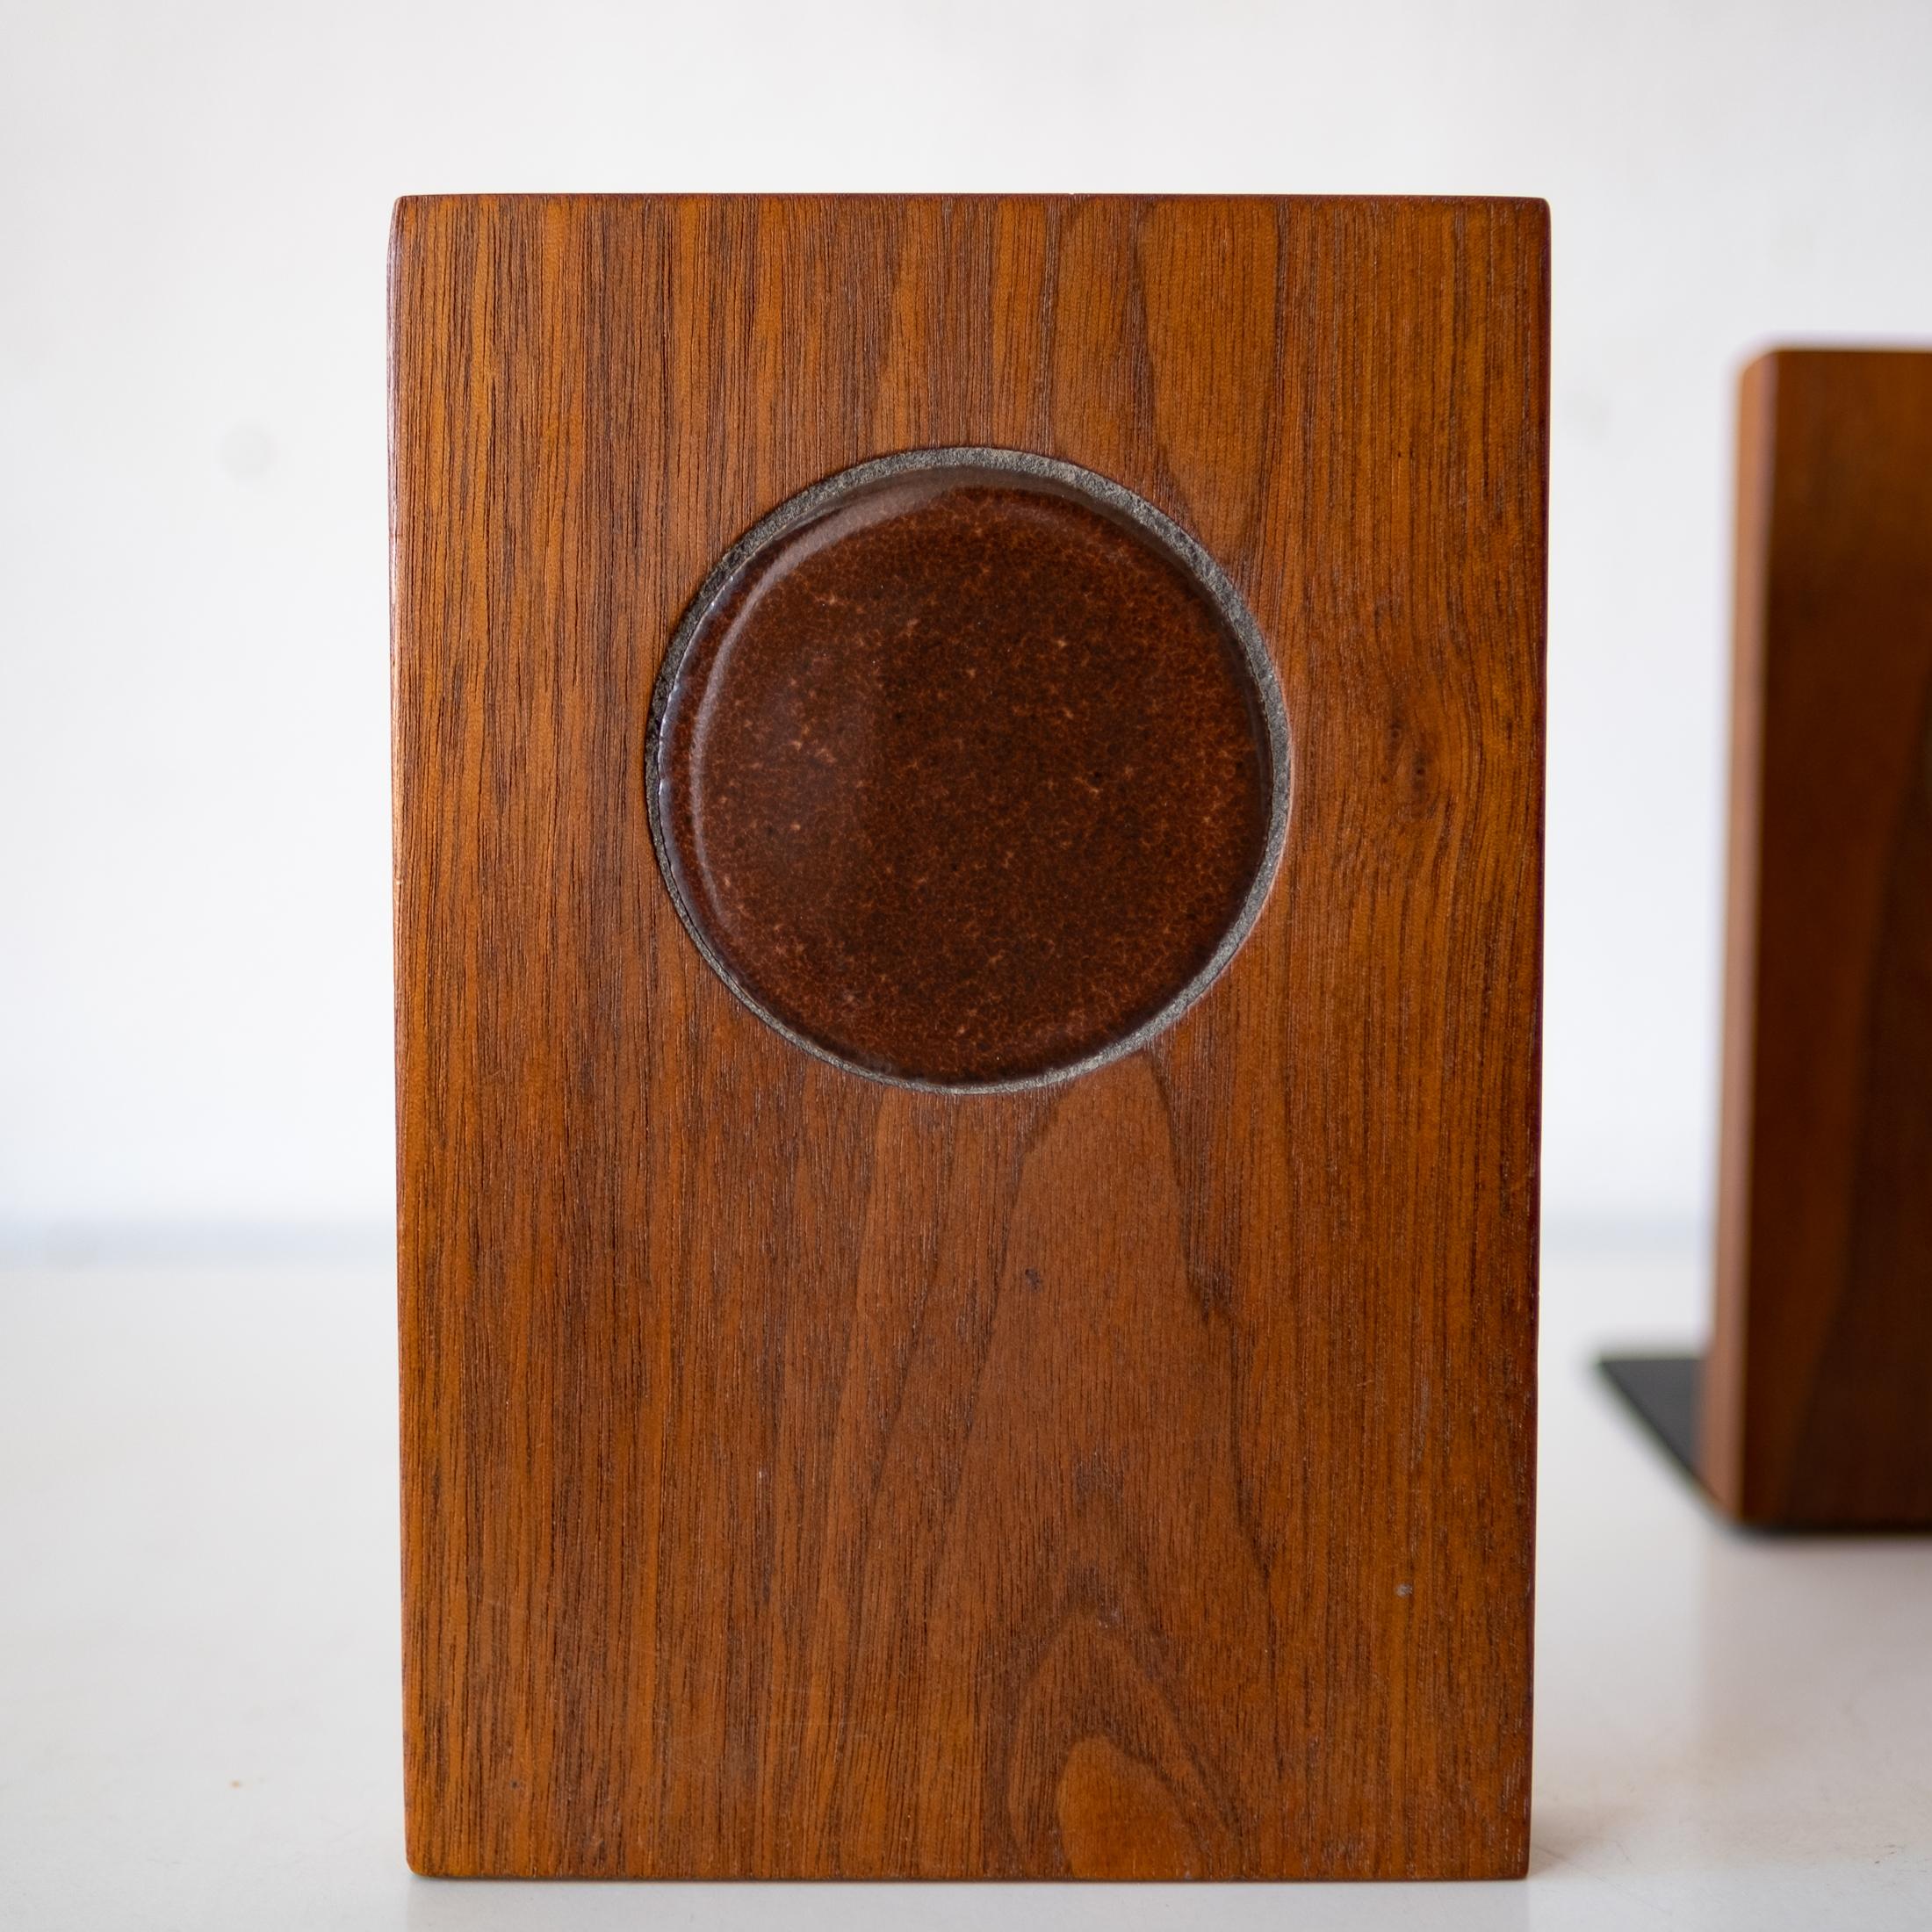 Midcentury Walnut and Ceramic Tile and Bookends For Sale 1